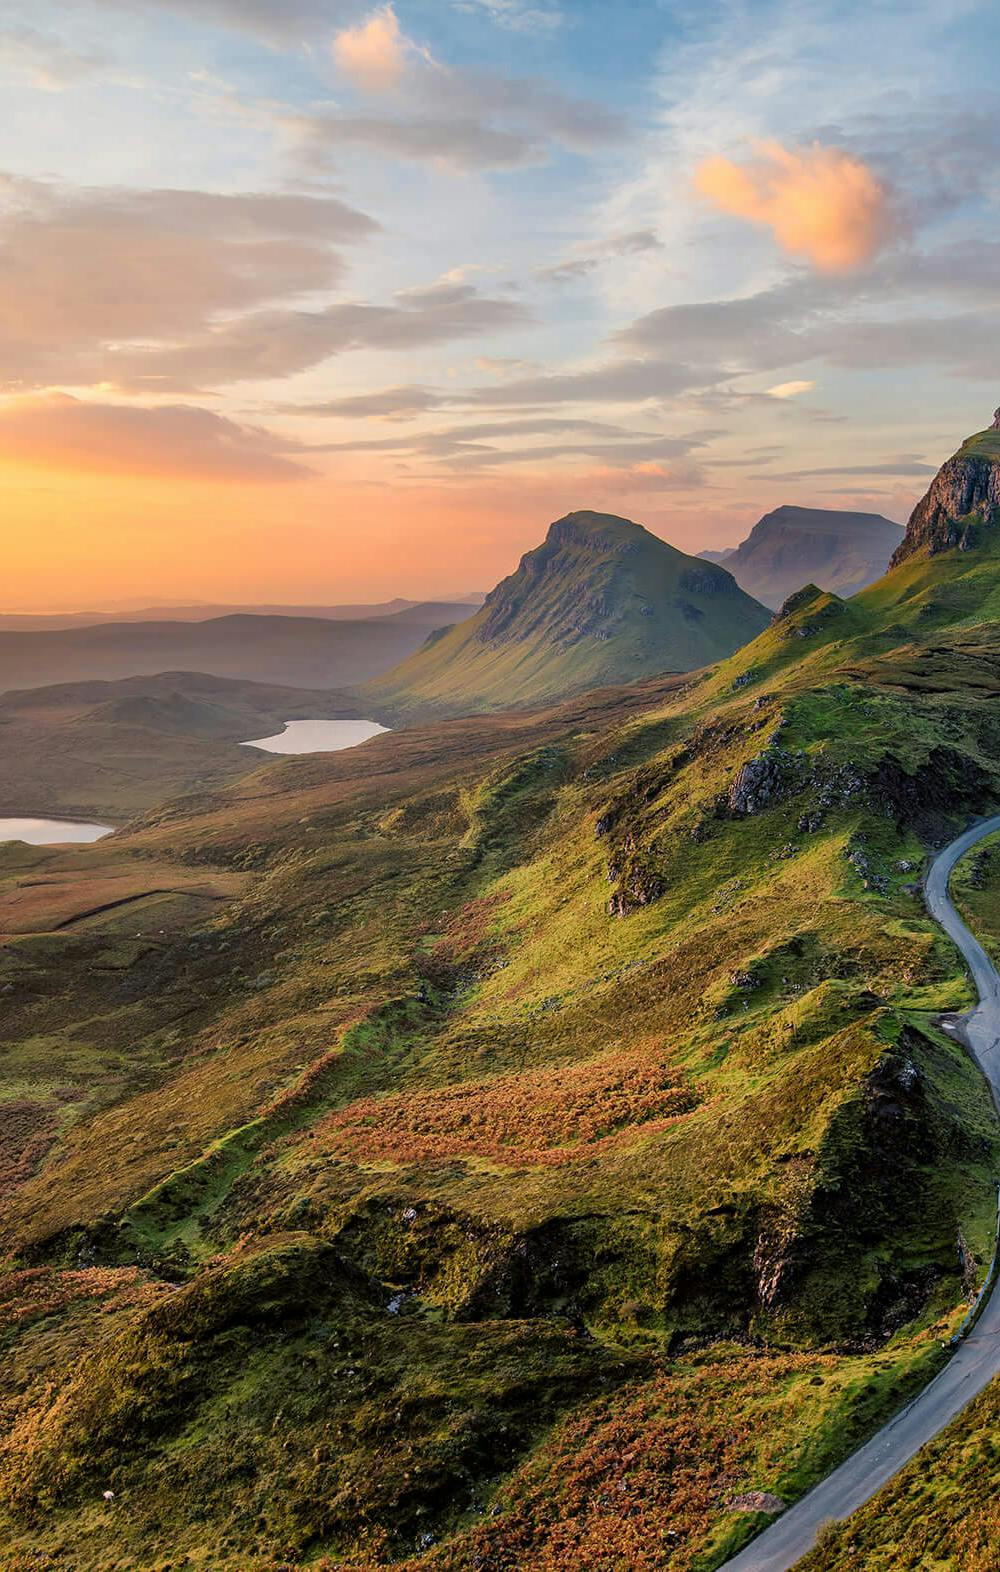 The Quiraing rock formation on the Isle of Skye